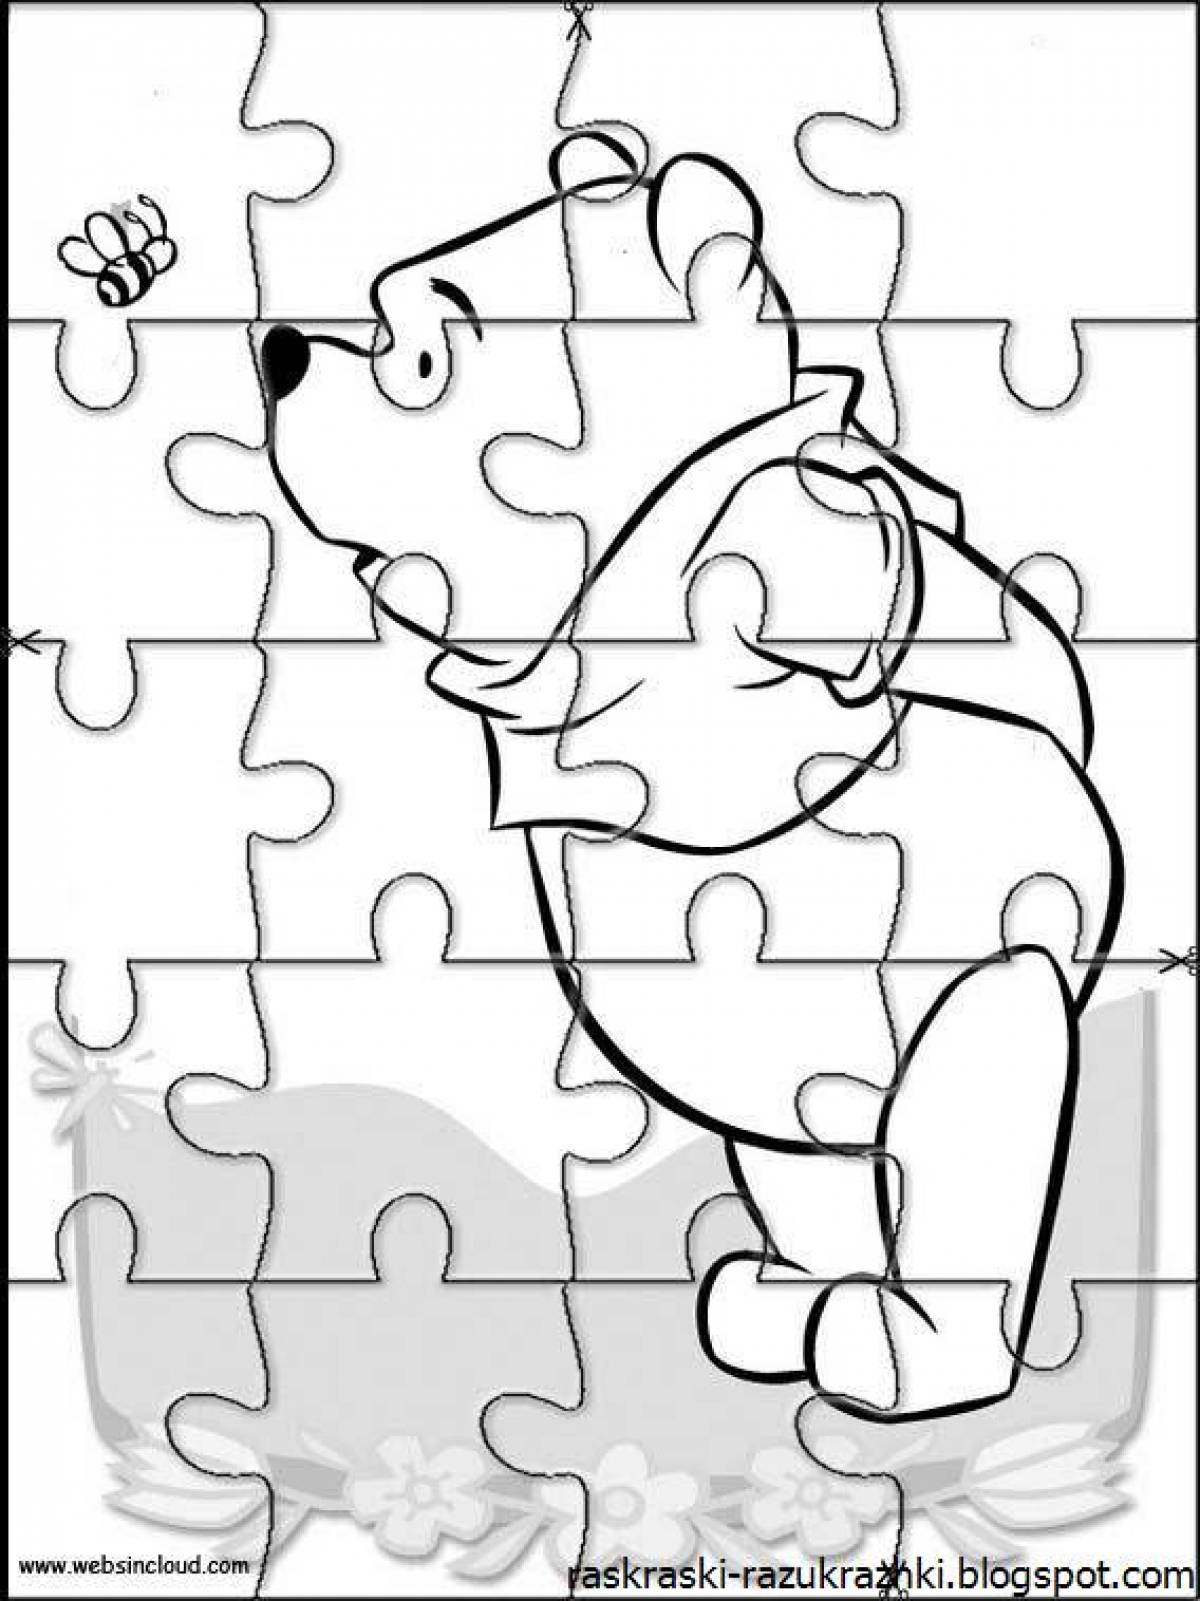 Great coloring puzzle